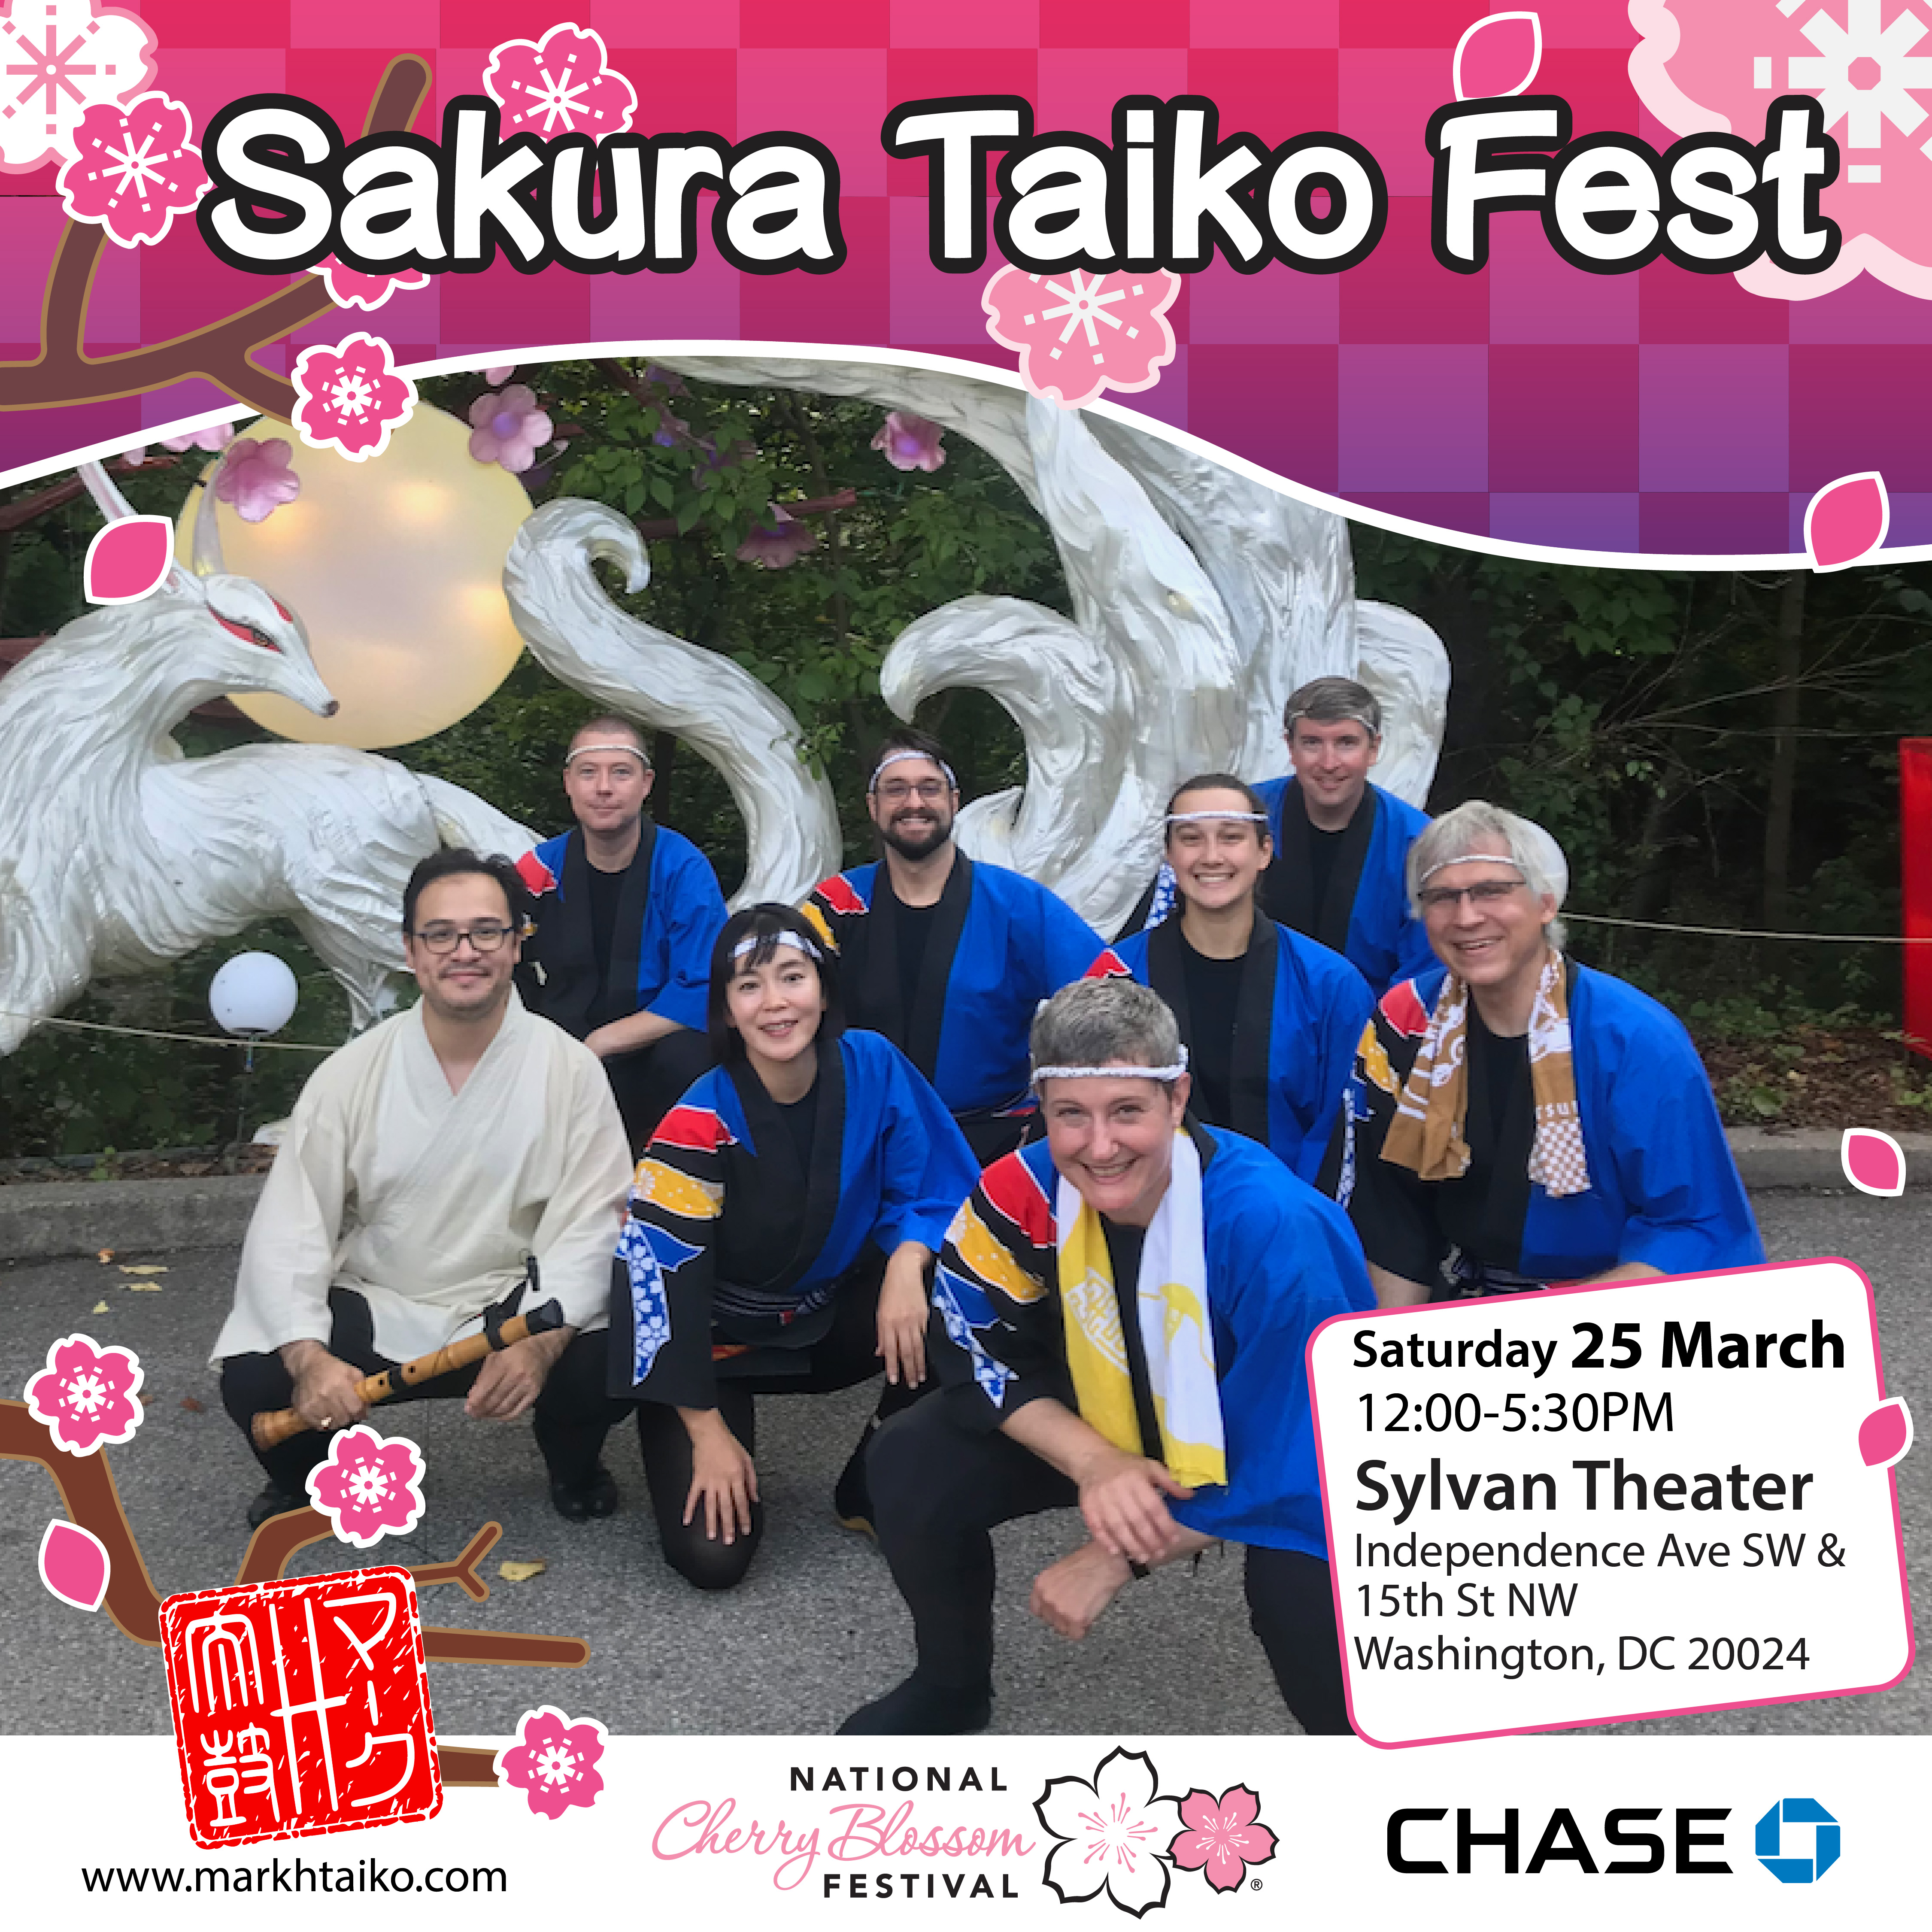 Photo of Pittsburgh Taiko with Sakura Taiko Fest information added - read the post to learn more.